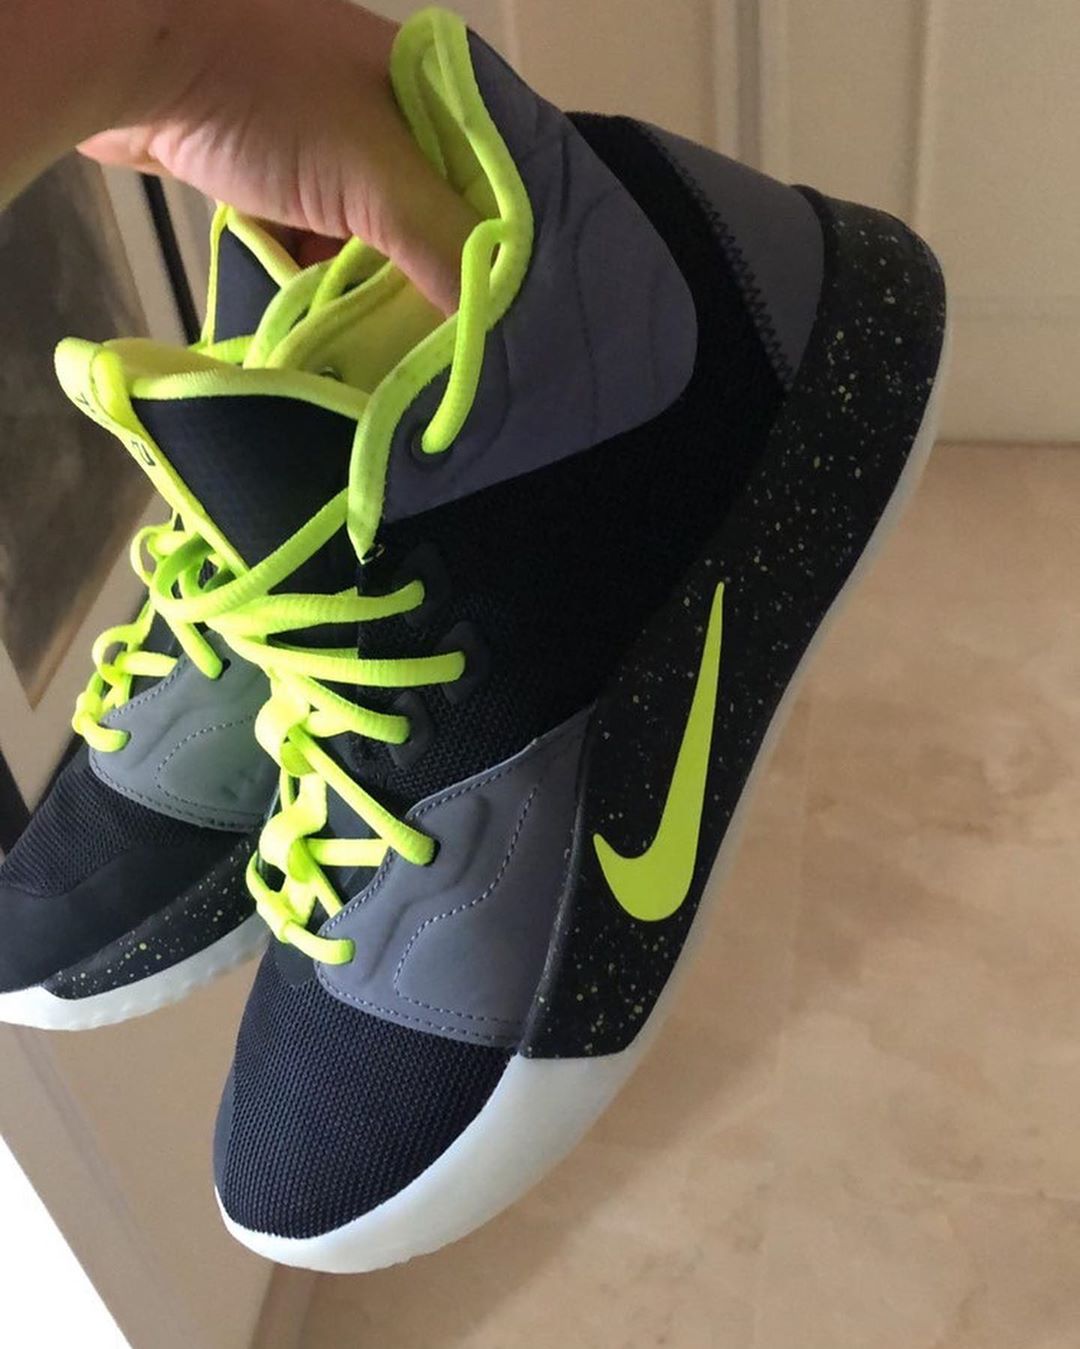 Nike By You PG 3 Black Cool Grey Volt